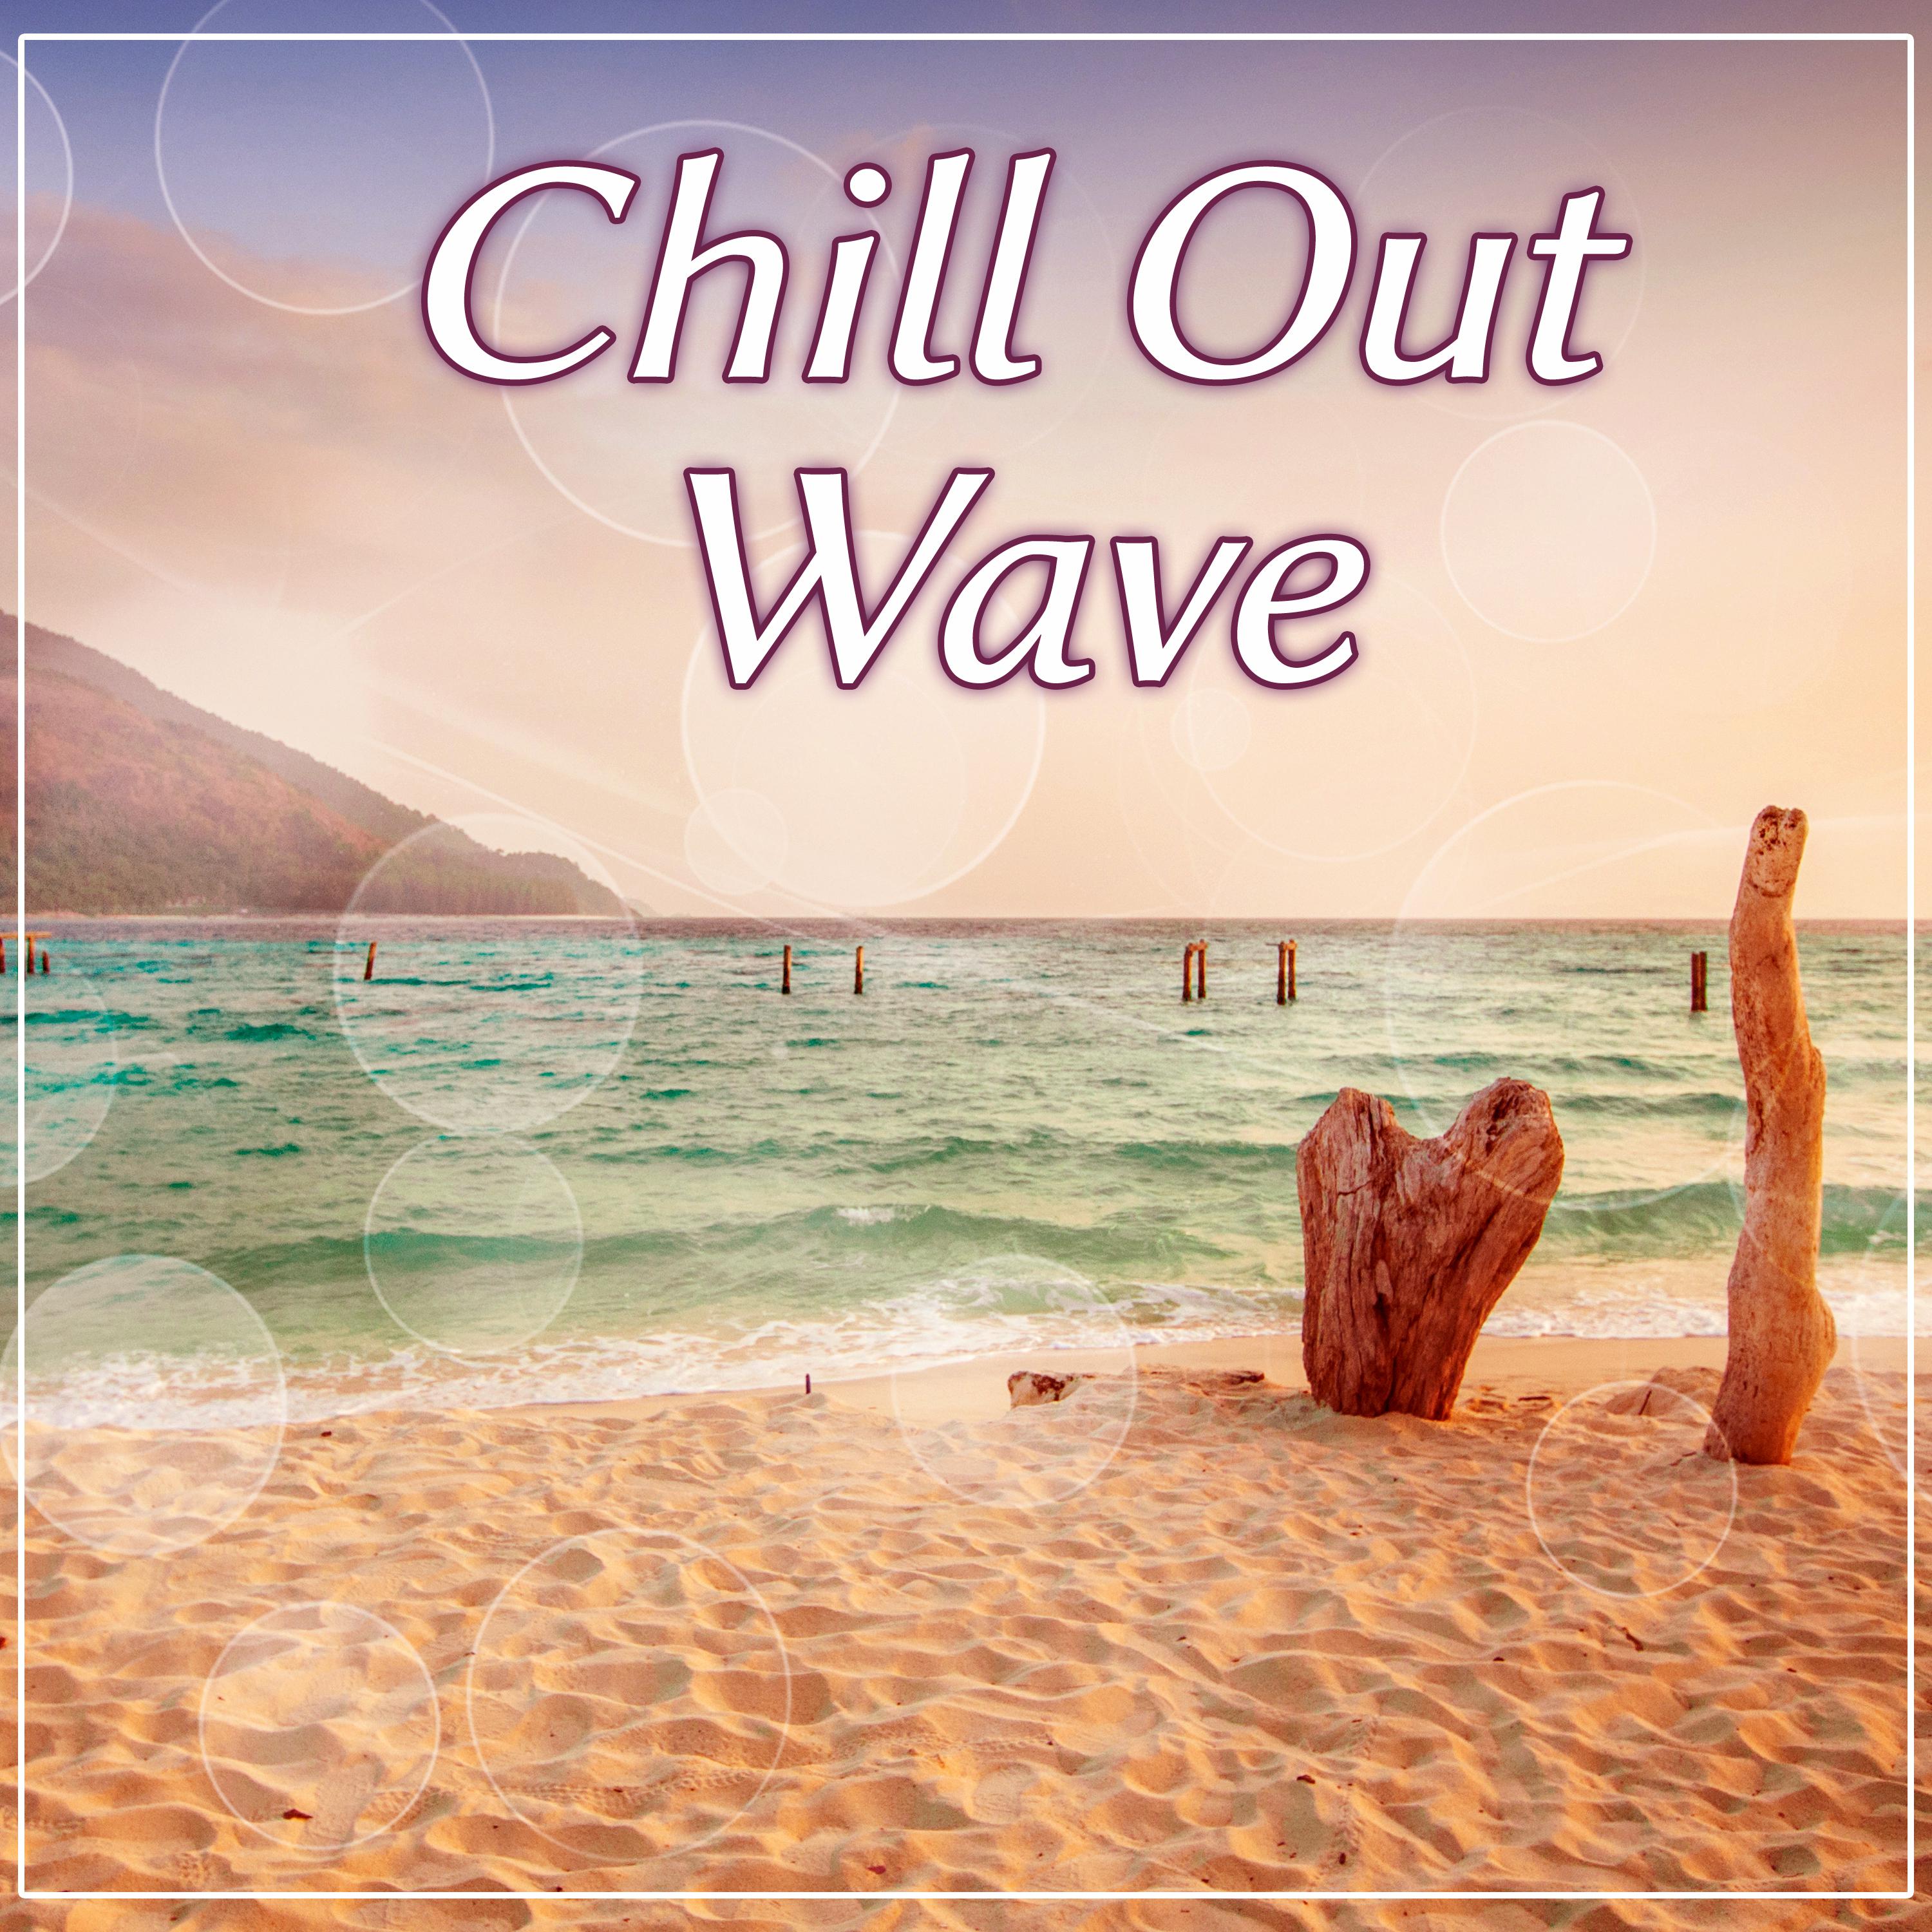 Chill Out Wave – Summer Hits of Chill Out Music, Ocean Waves, Sexy Chill Out, Beach Music, Chill Lounge, Ocean Dreams, Chill Out Lounge